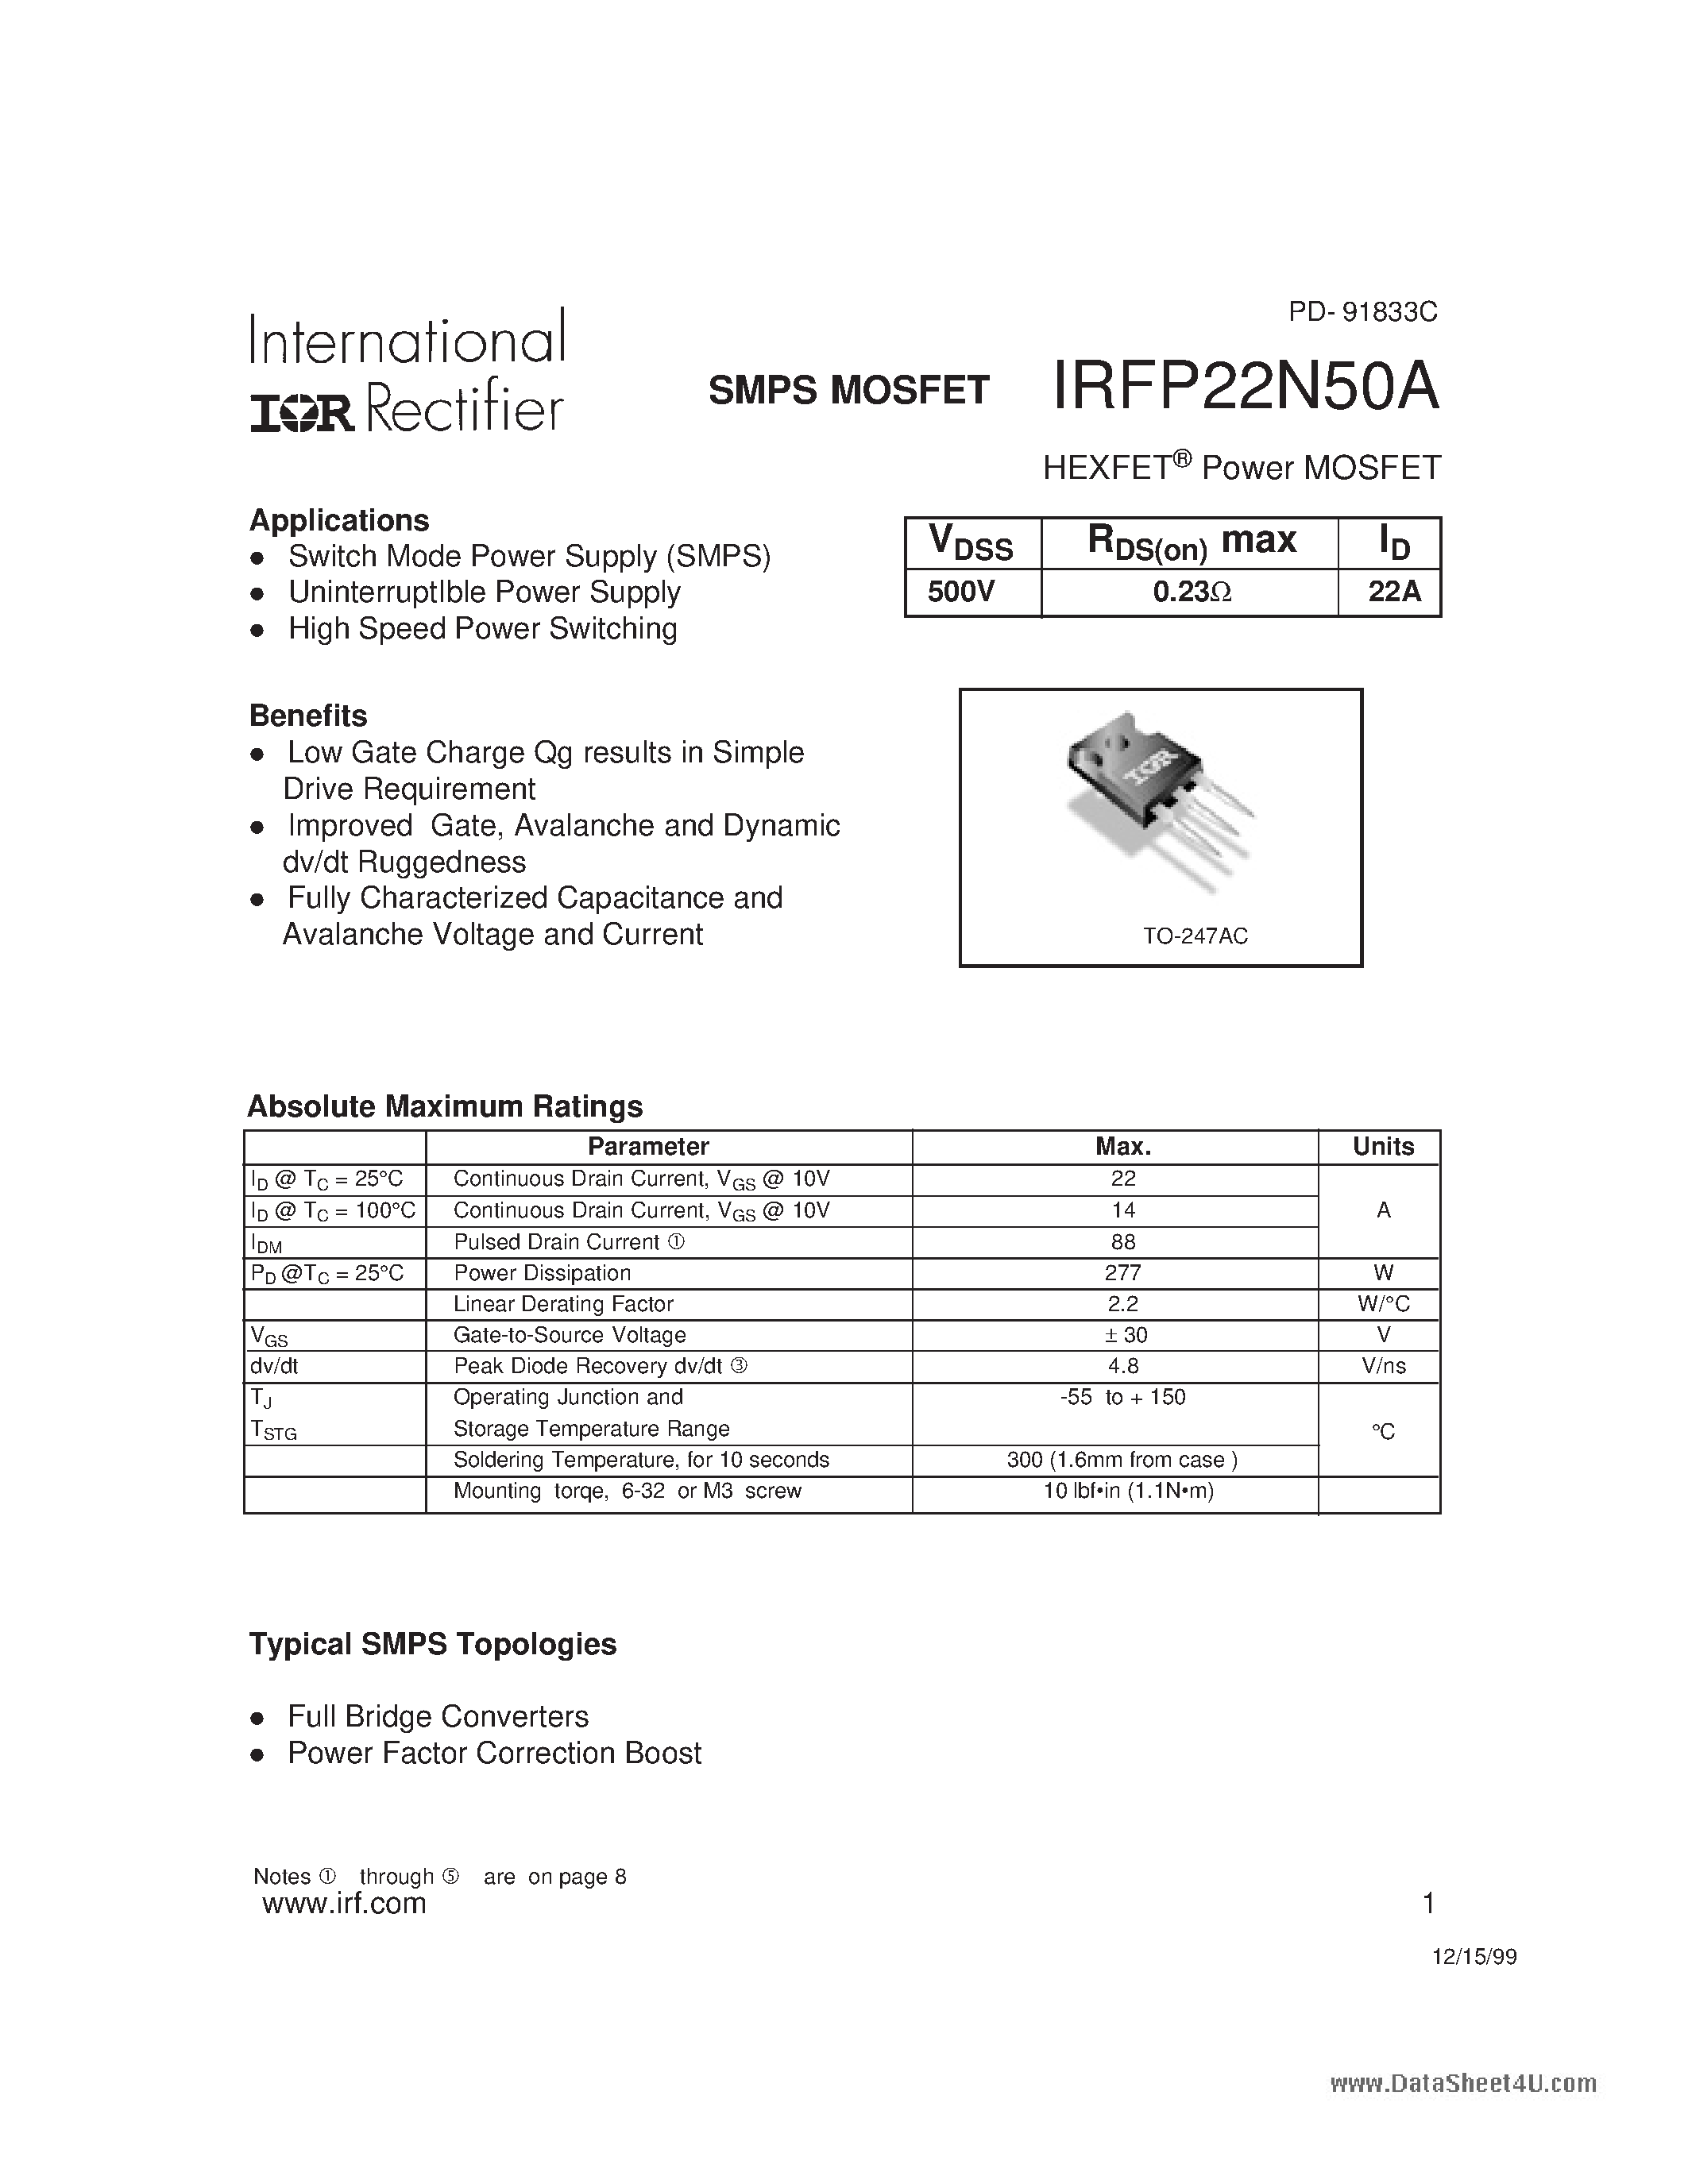 Даташит IRFP22N50A - SMPS MOSFET страница 1